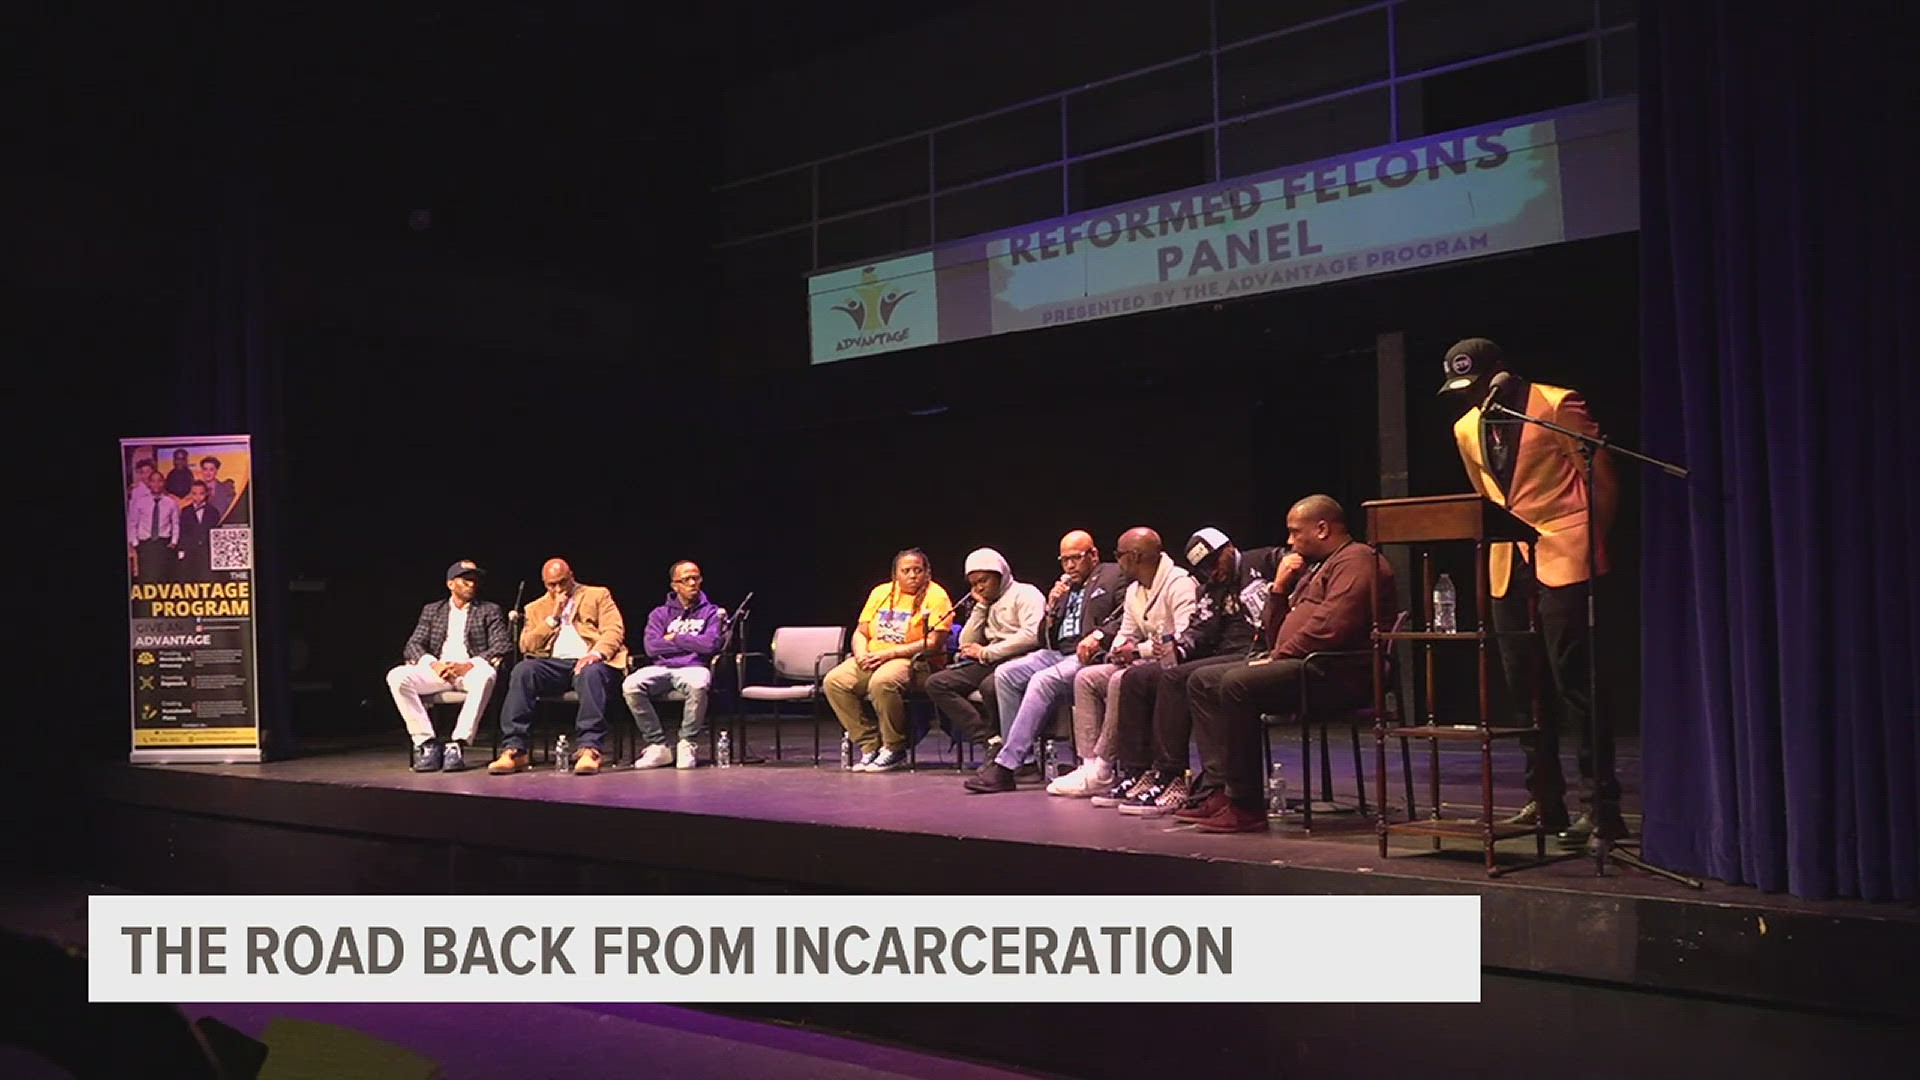 A group of people who were formerly incarcerated met in York, hoping to keep more people out of jail and help those who have been released.